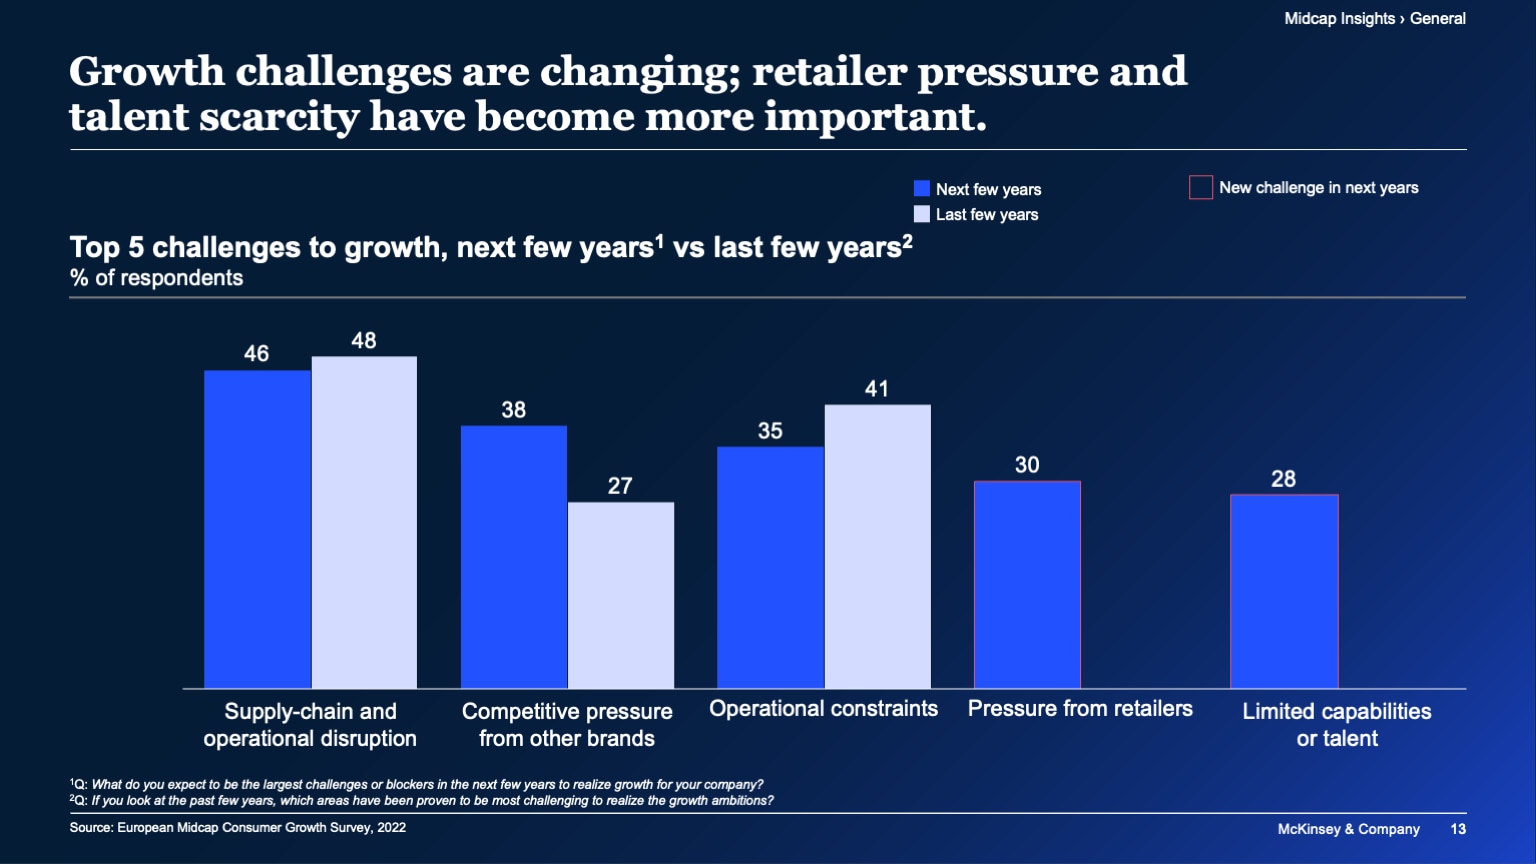 Growth challenges are changing; retailer pressure and talent scarcity have become more important.